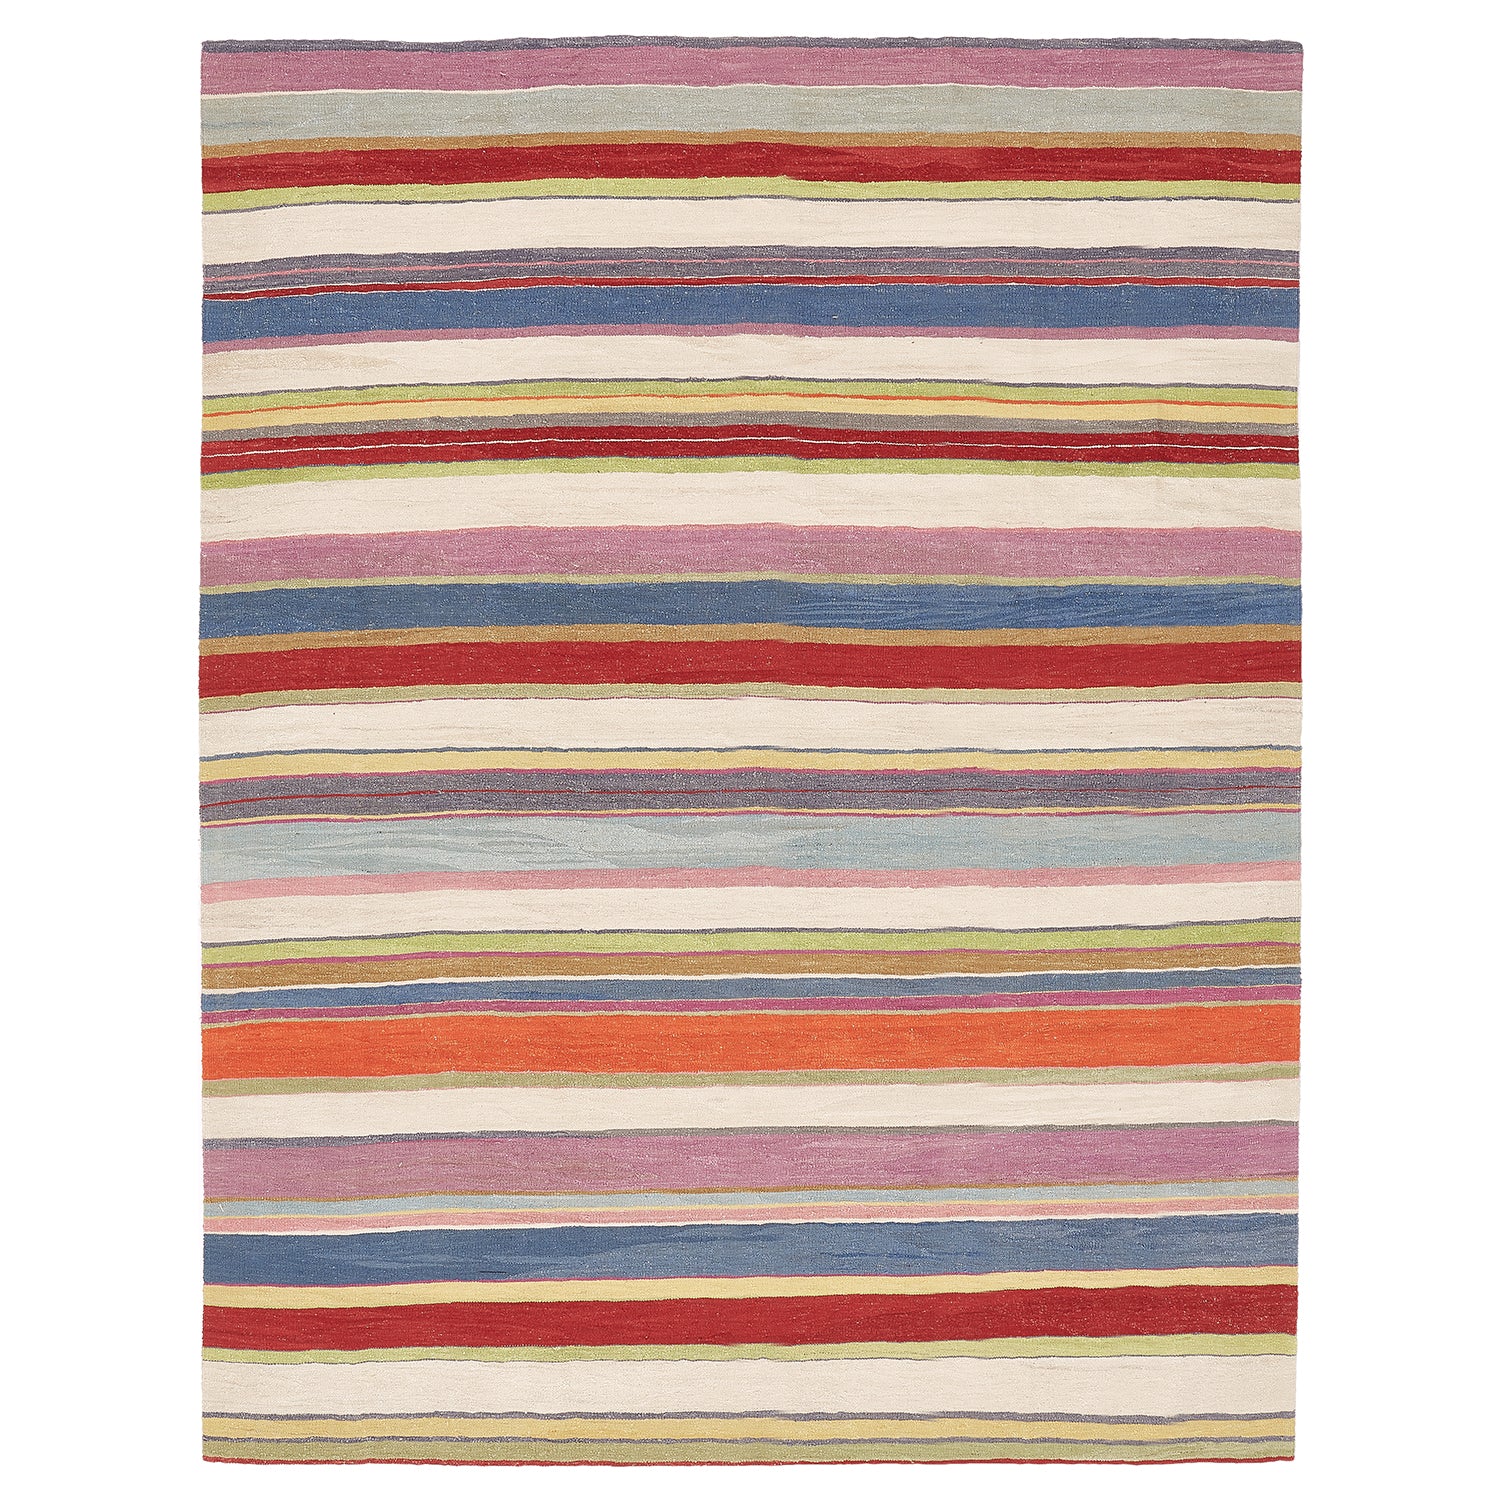 Colorful striped rectangular rug with a casual, eclectic design